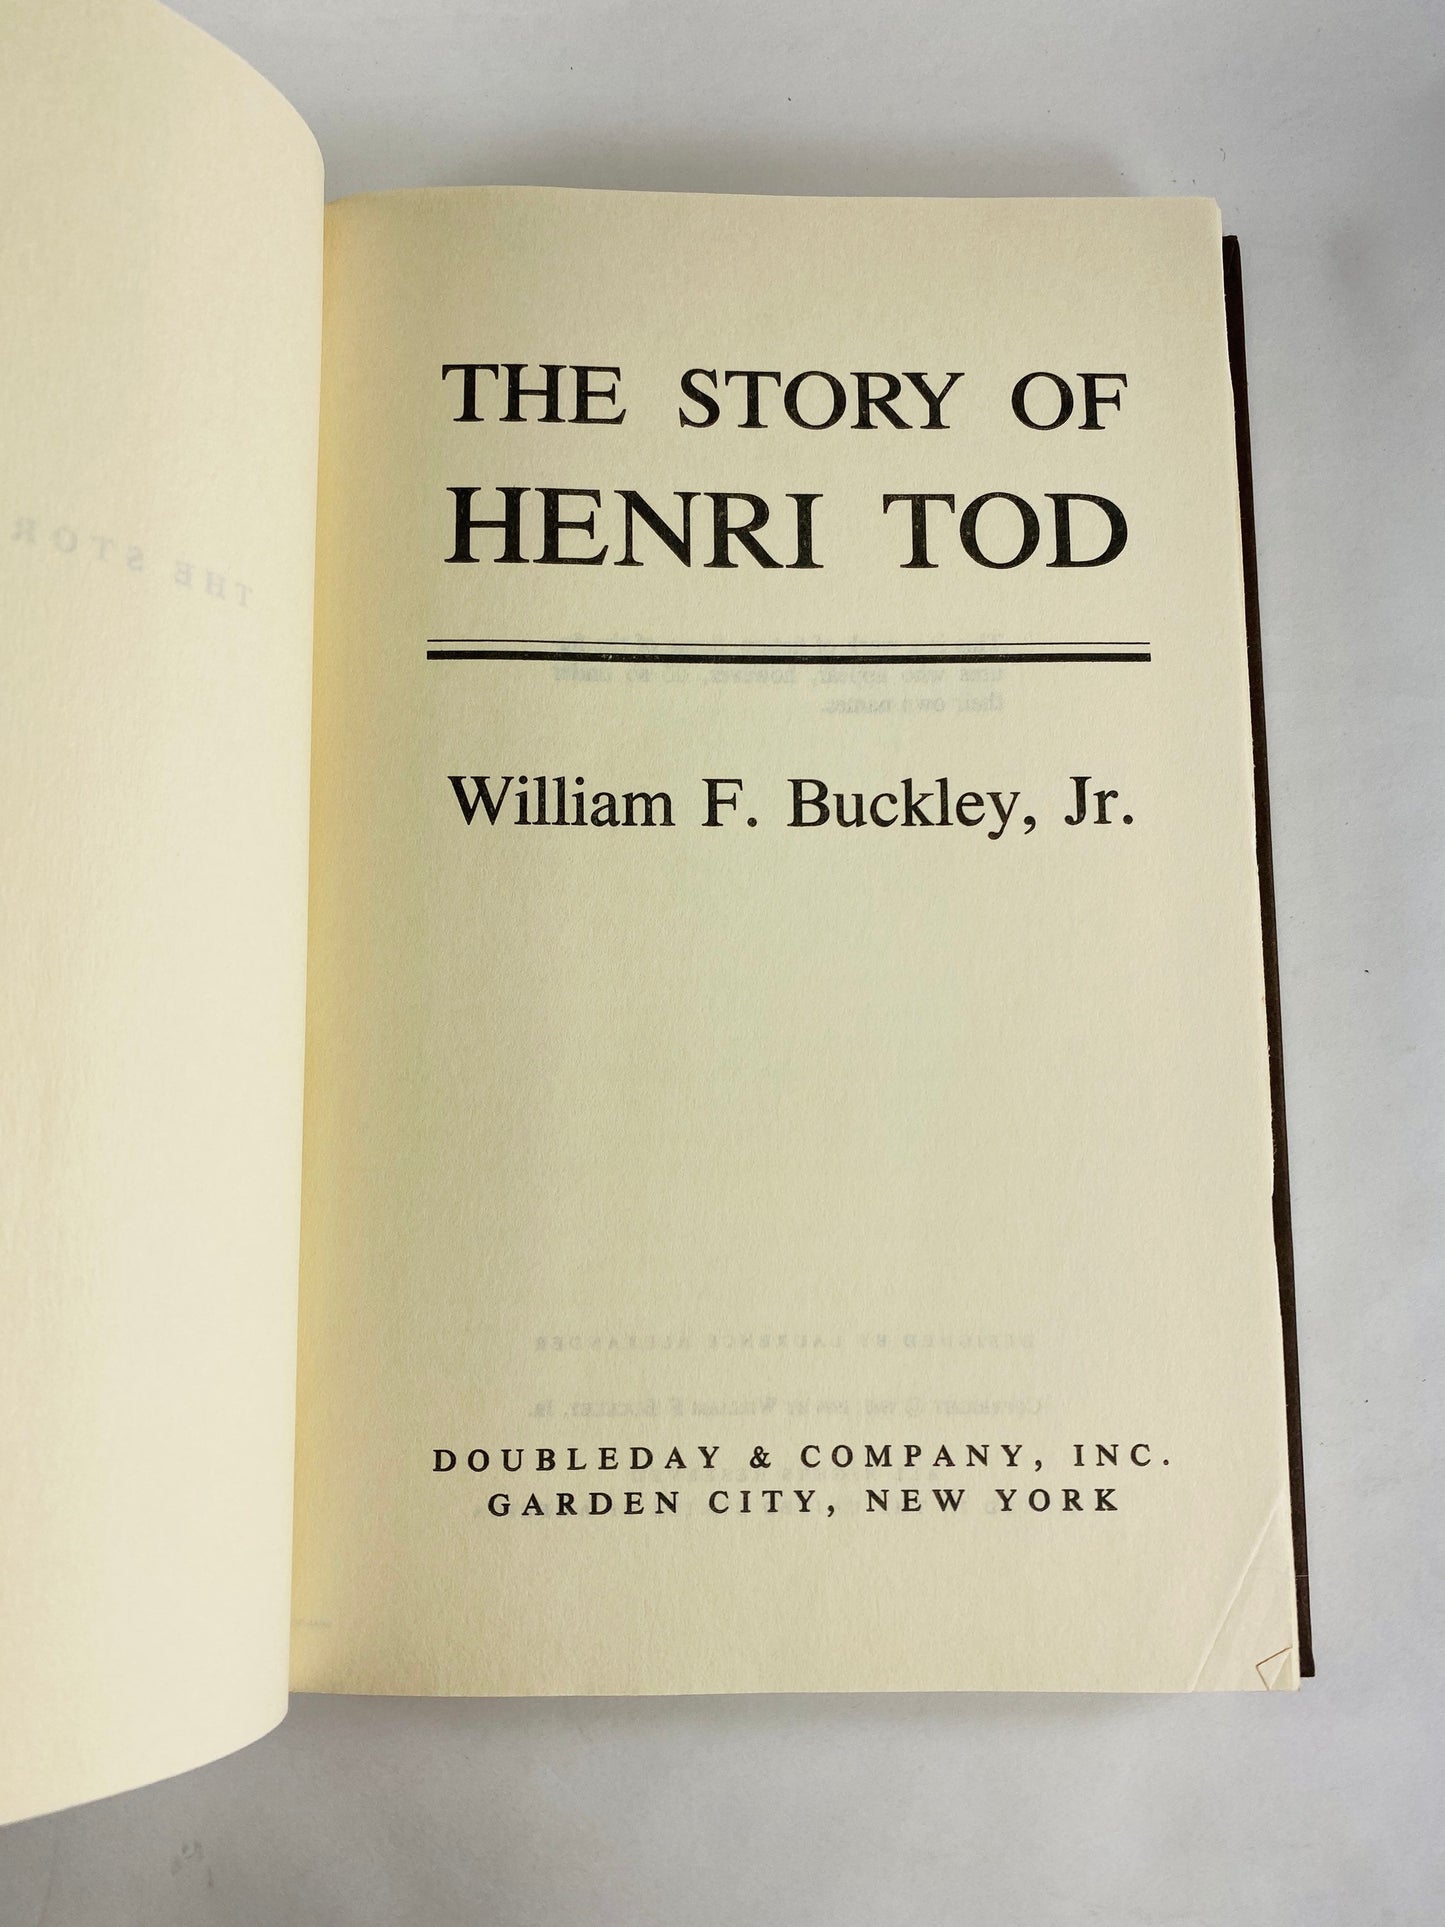 Story of Henri Tod by William F Buckley vintage book circa 1984 set in East Germany. Brown bookshelf decor